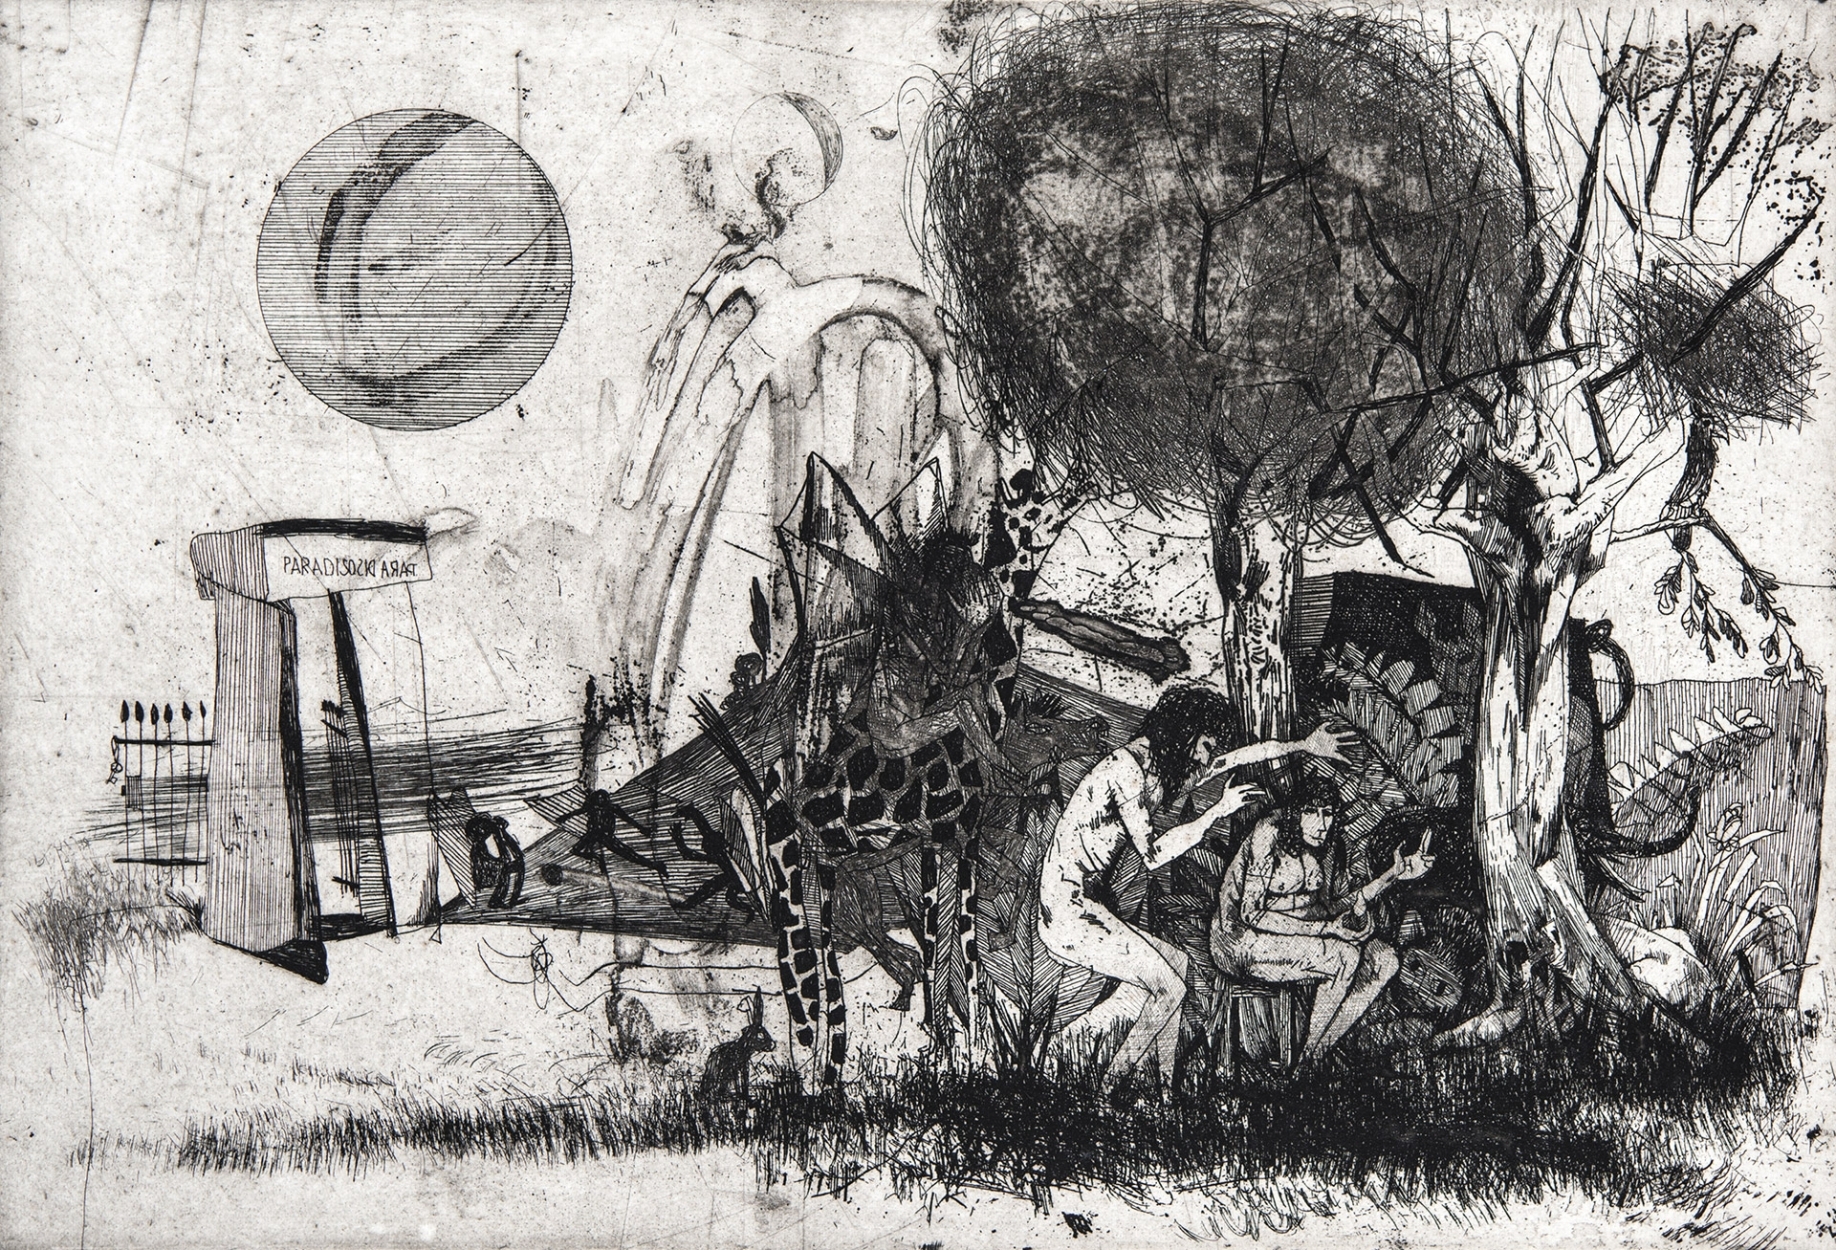 Kondor Béla (1931-1972) Paradise, expulsion (Illustration to Imre Madách's The Tragedy of Man), 1964